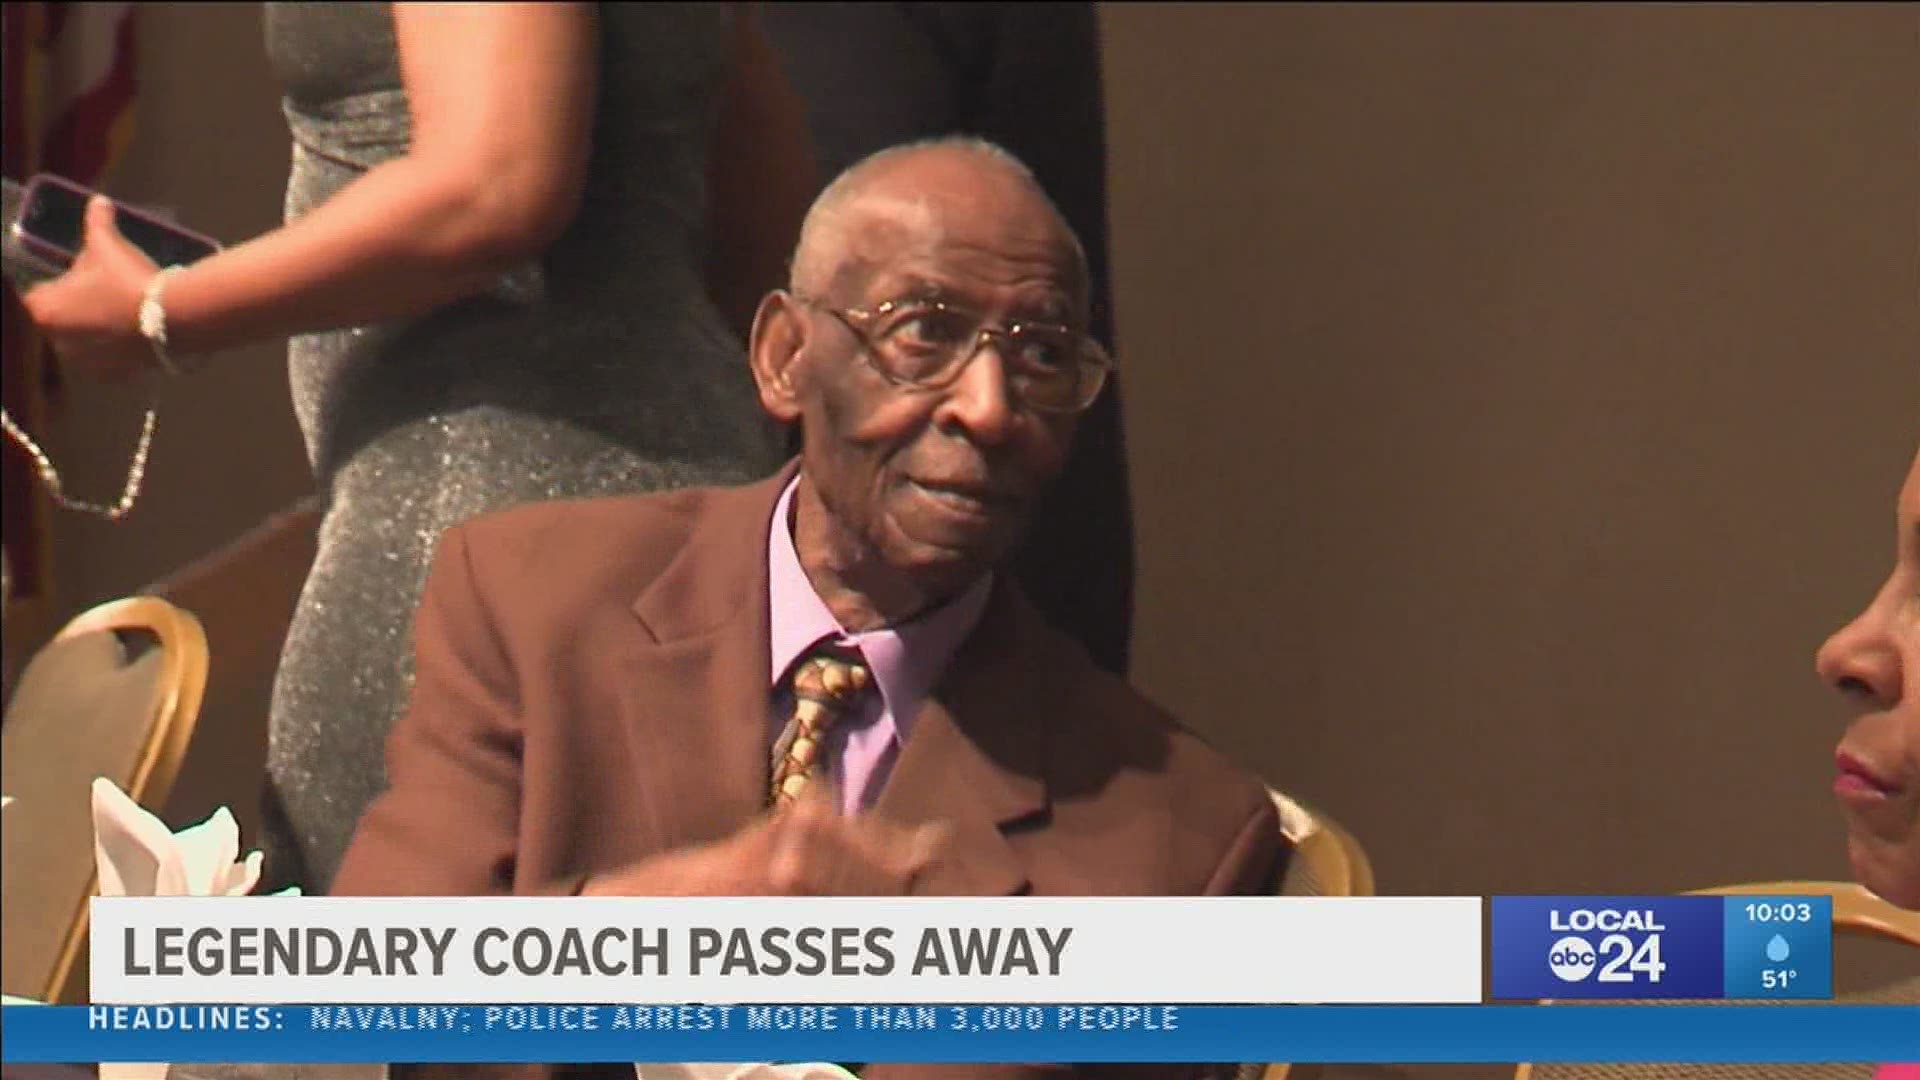 Coach Jerry Johnson passed away in his sleep, the college confirmed Sunday afternoon.